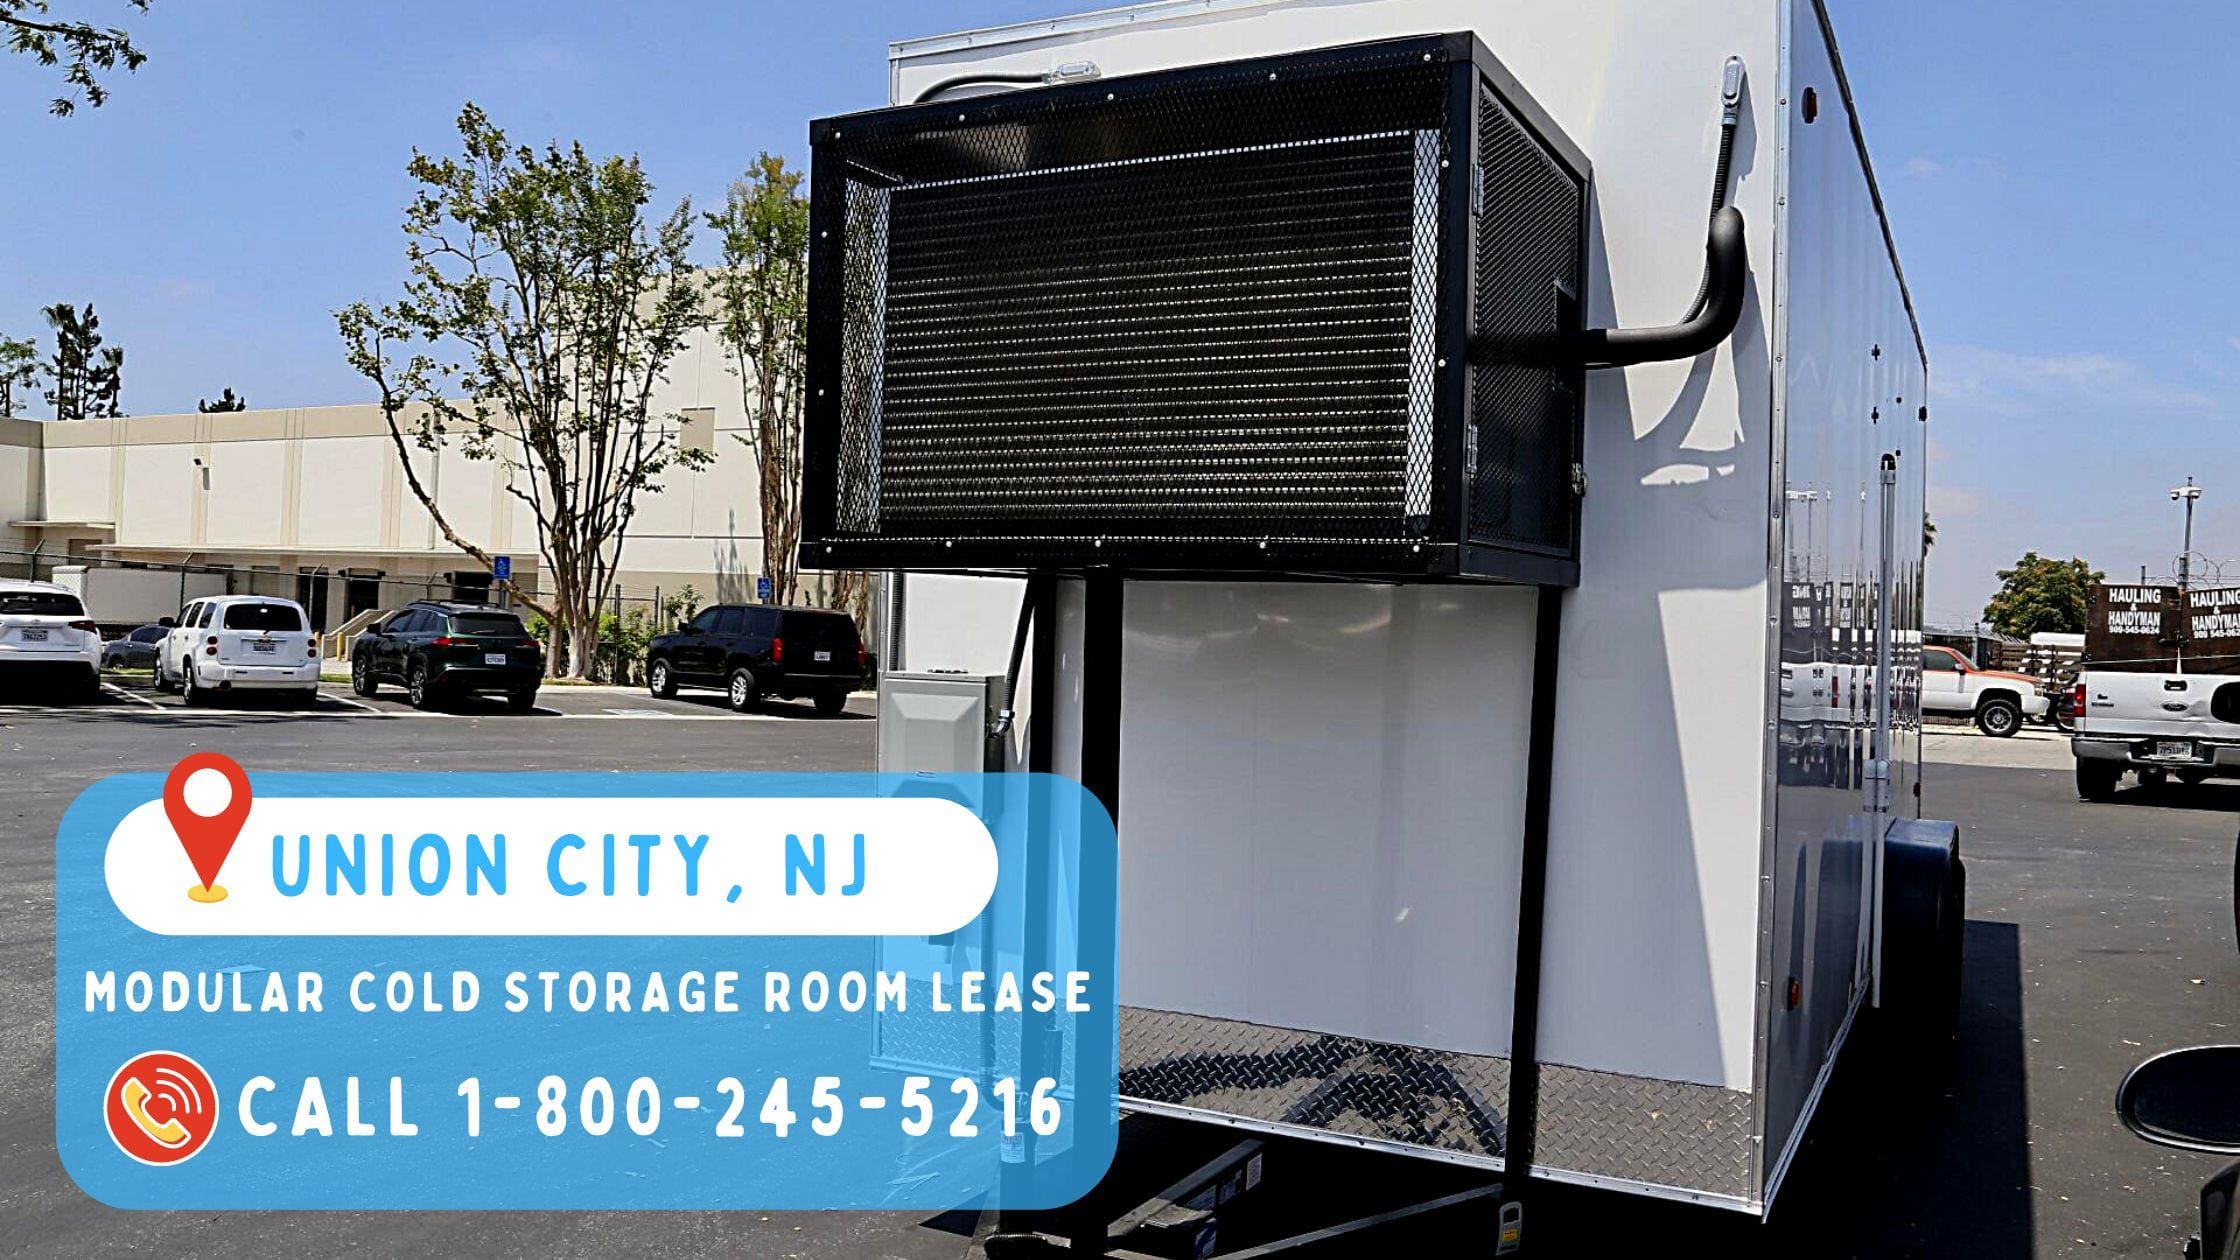 Modular Cold Storage Room Lease in Union City